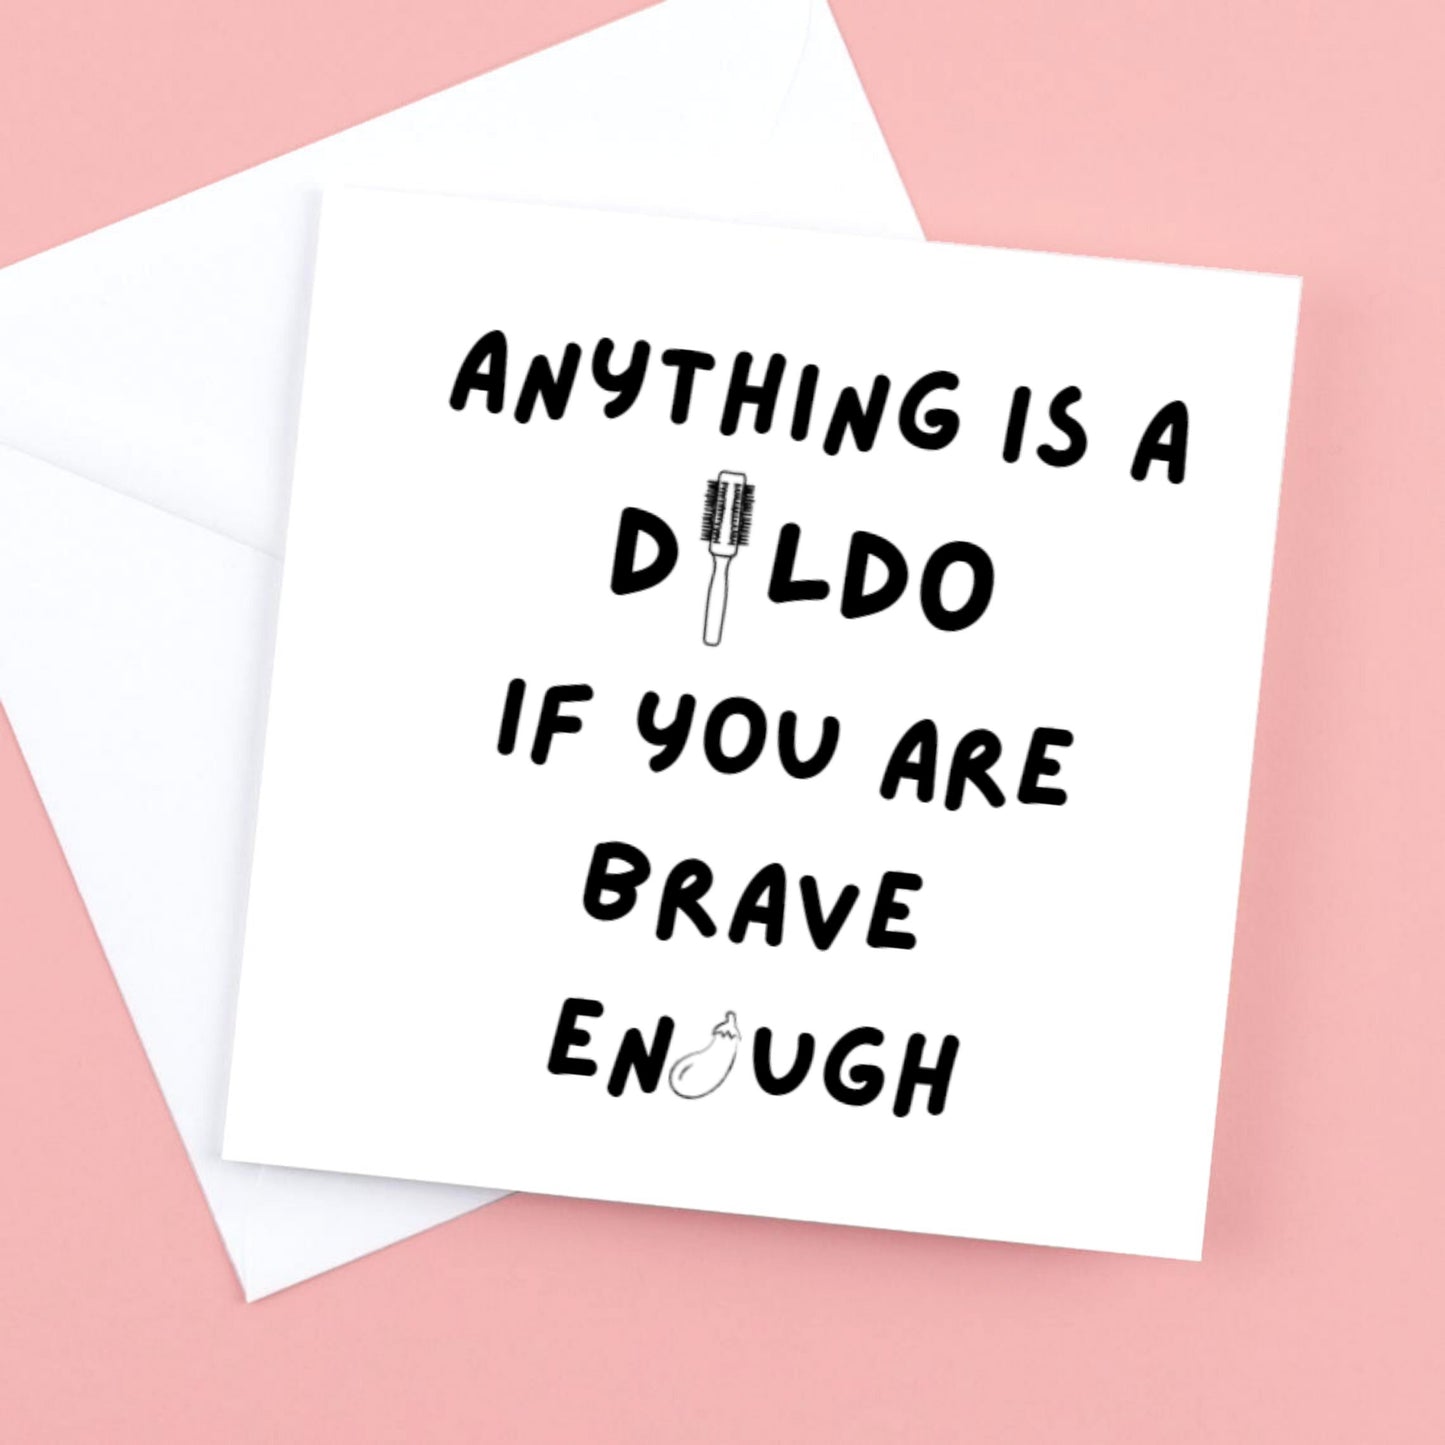 Funny Valentines Card, Anything is a Dildo if you are brave enough.